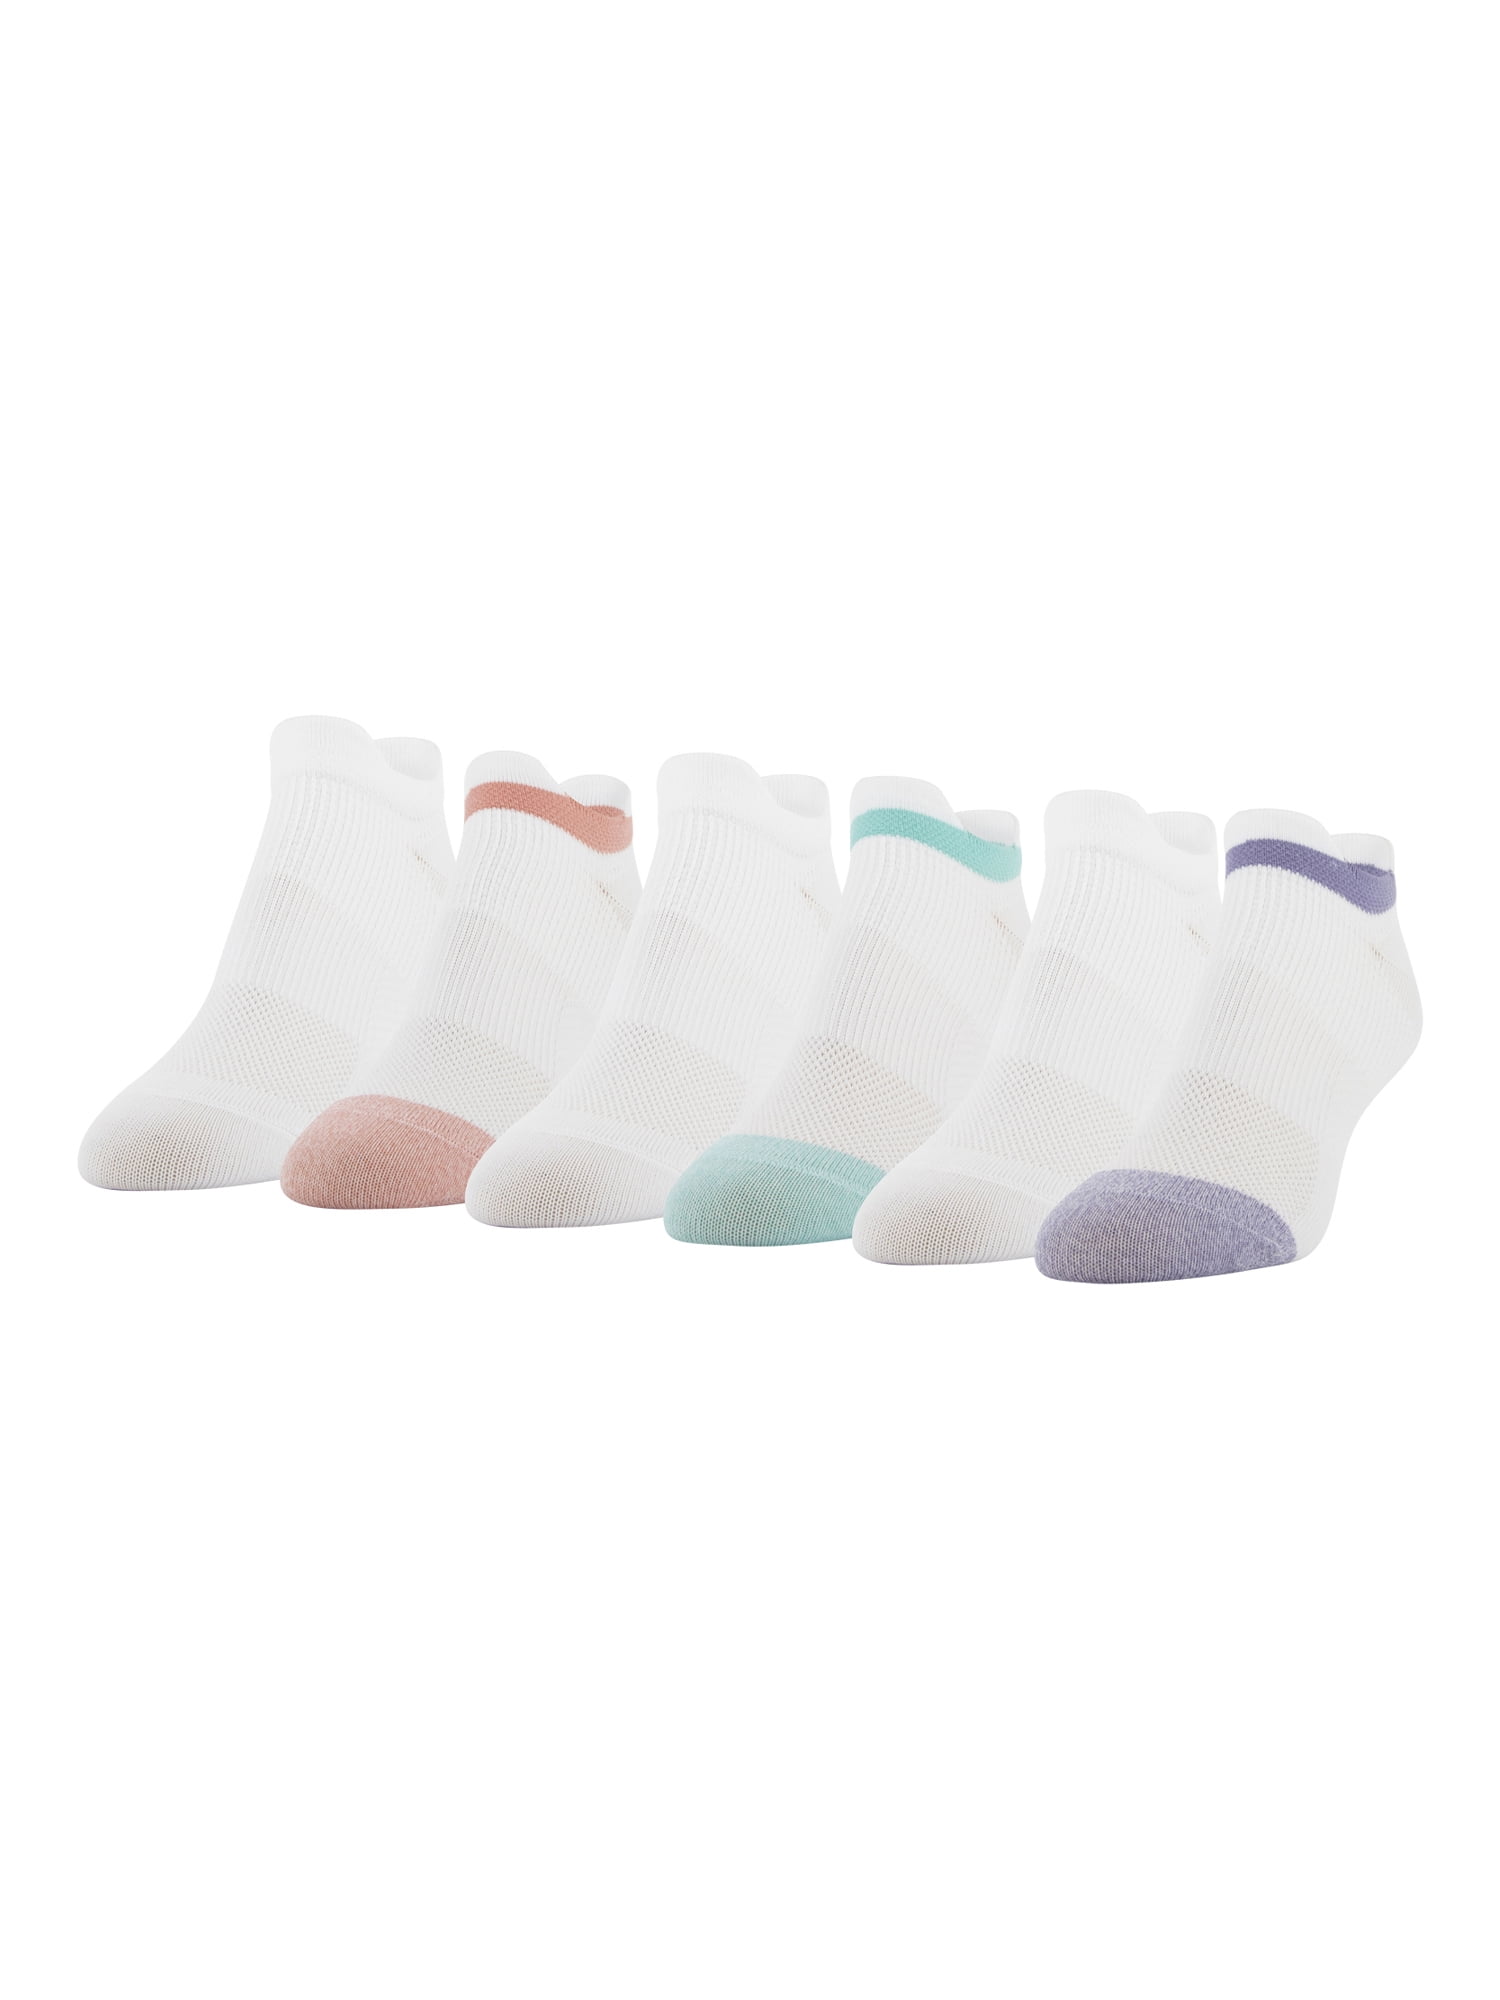 Peds Womens All Day Active No Show Socks with Double Tabs,6 Pairs ...